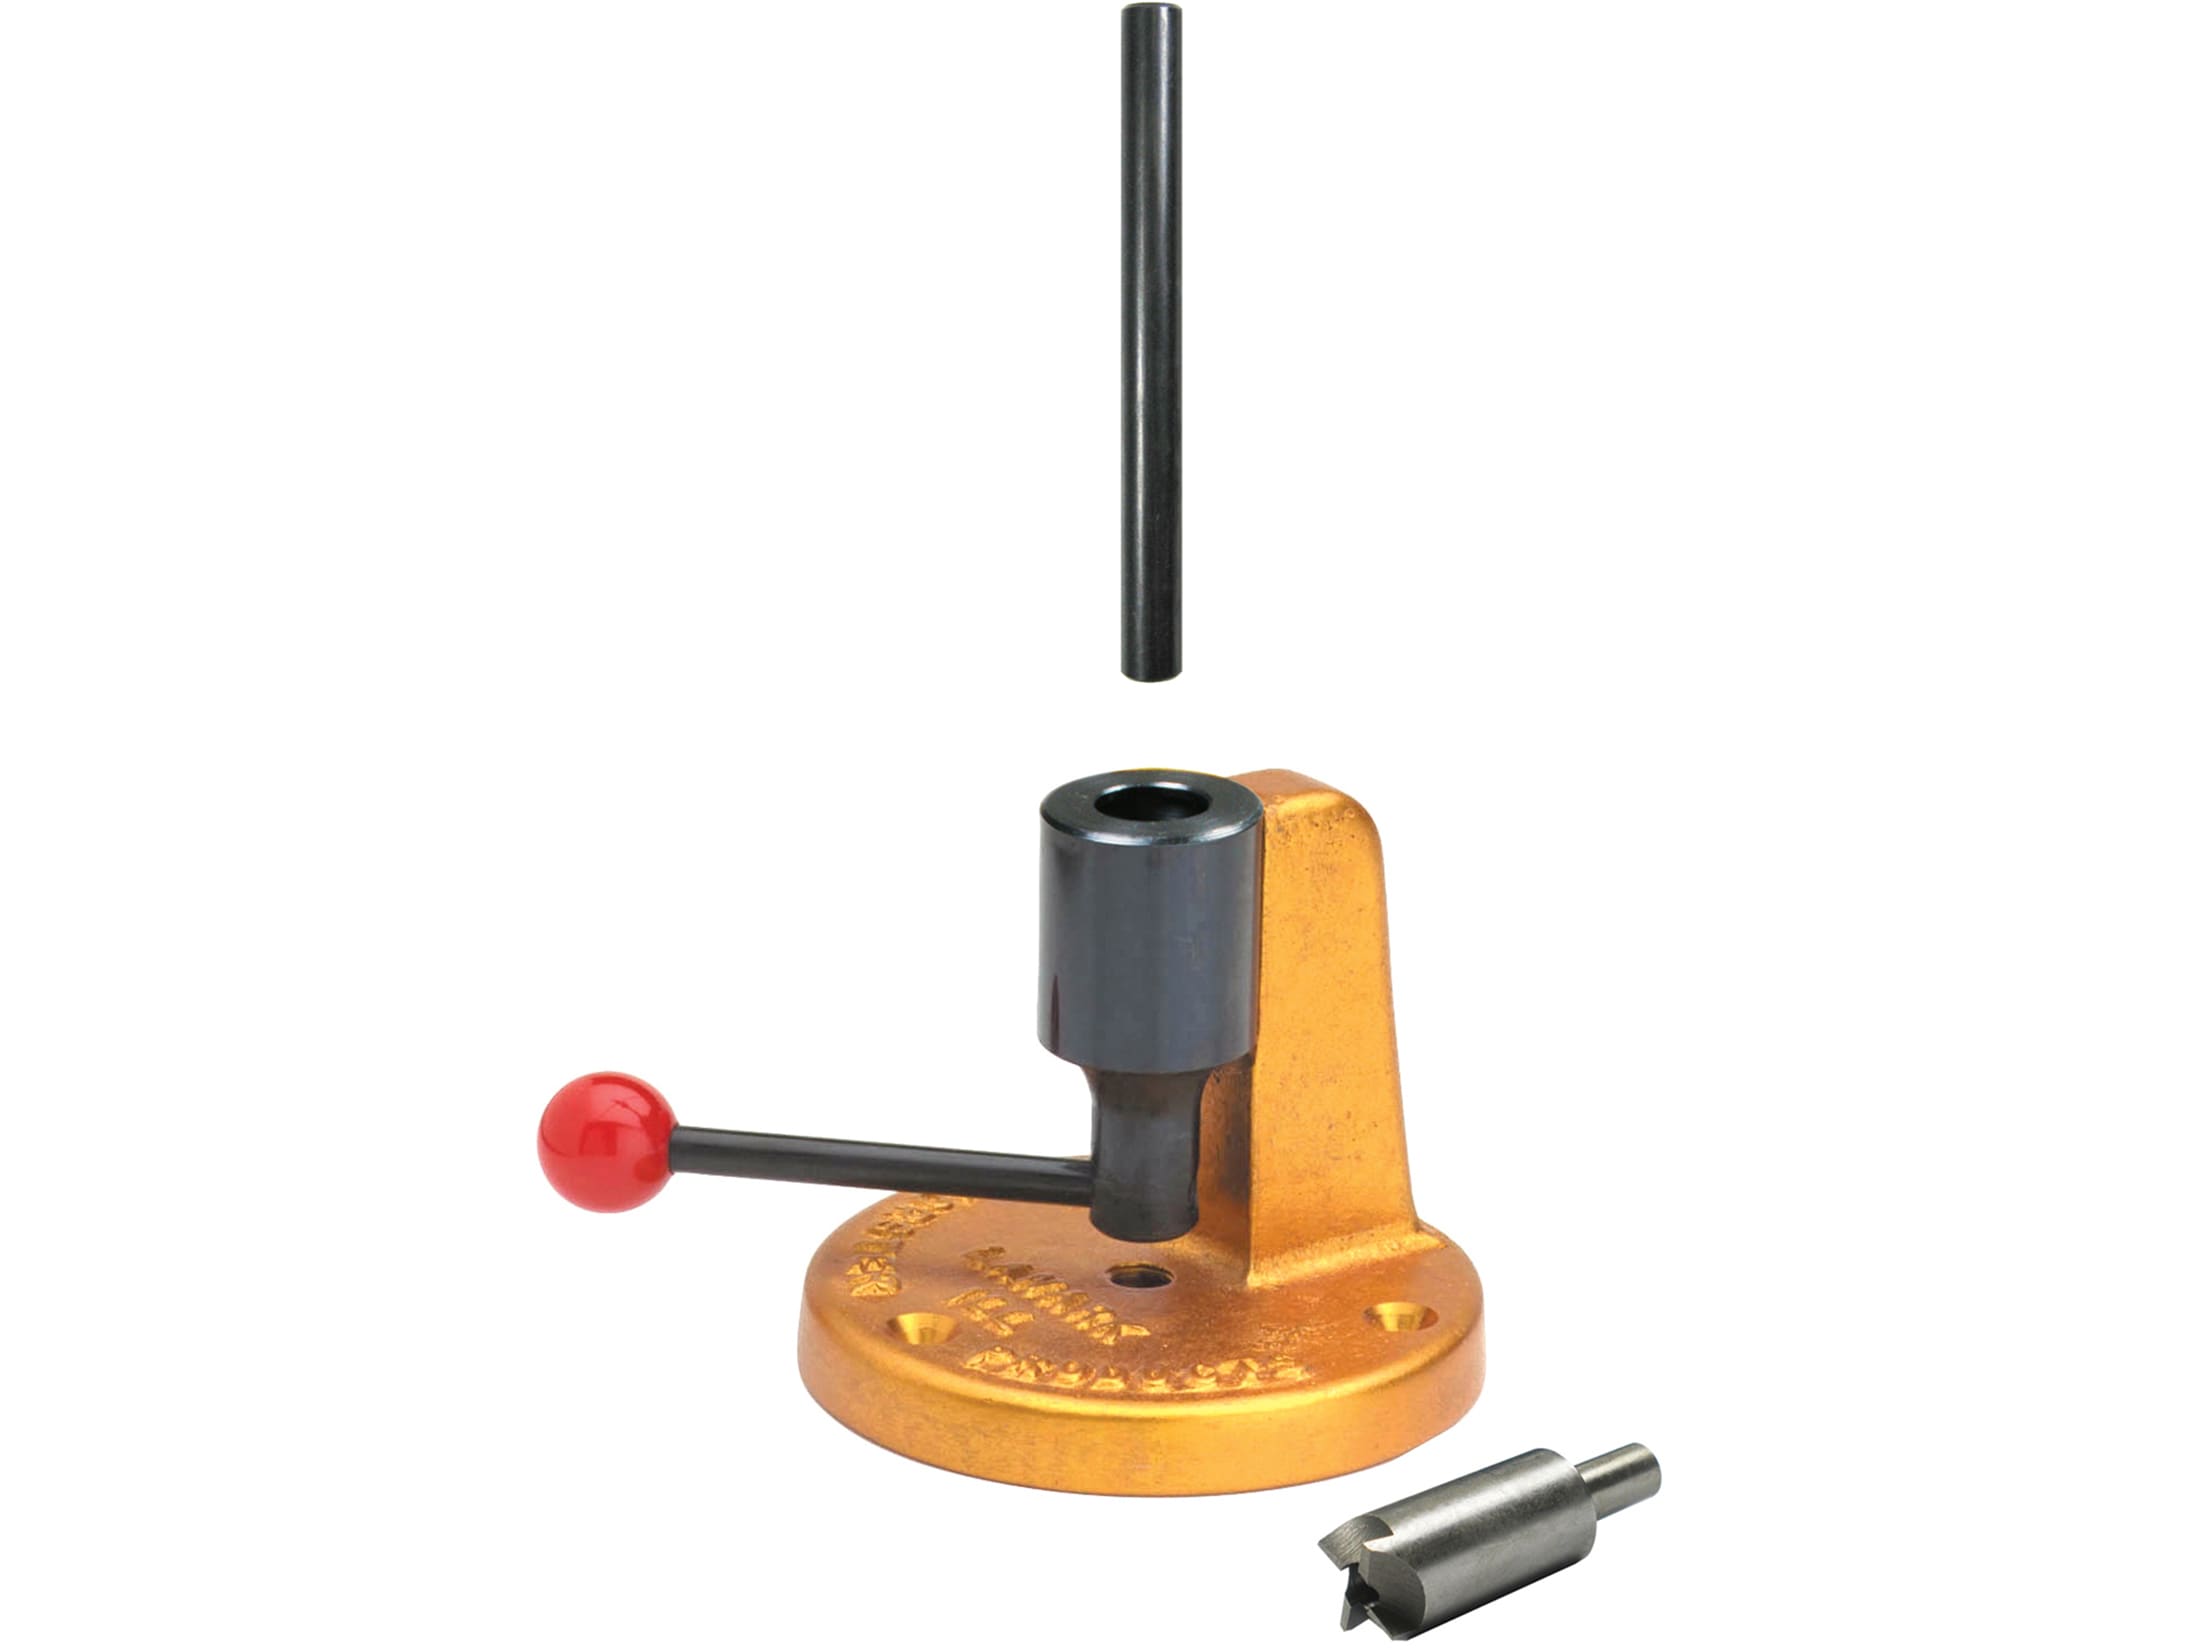 Power Reloading Case TRIMMER for Hornady, RCBS, Lyman Power Case Centers -  DACaM Reloading Tools